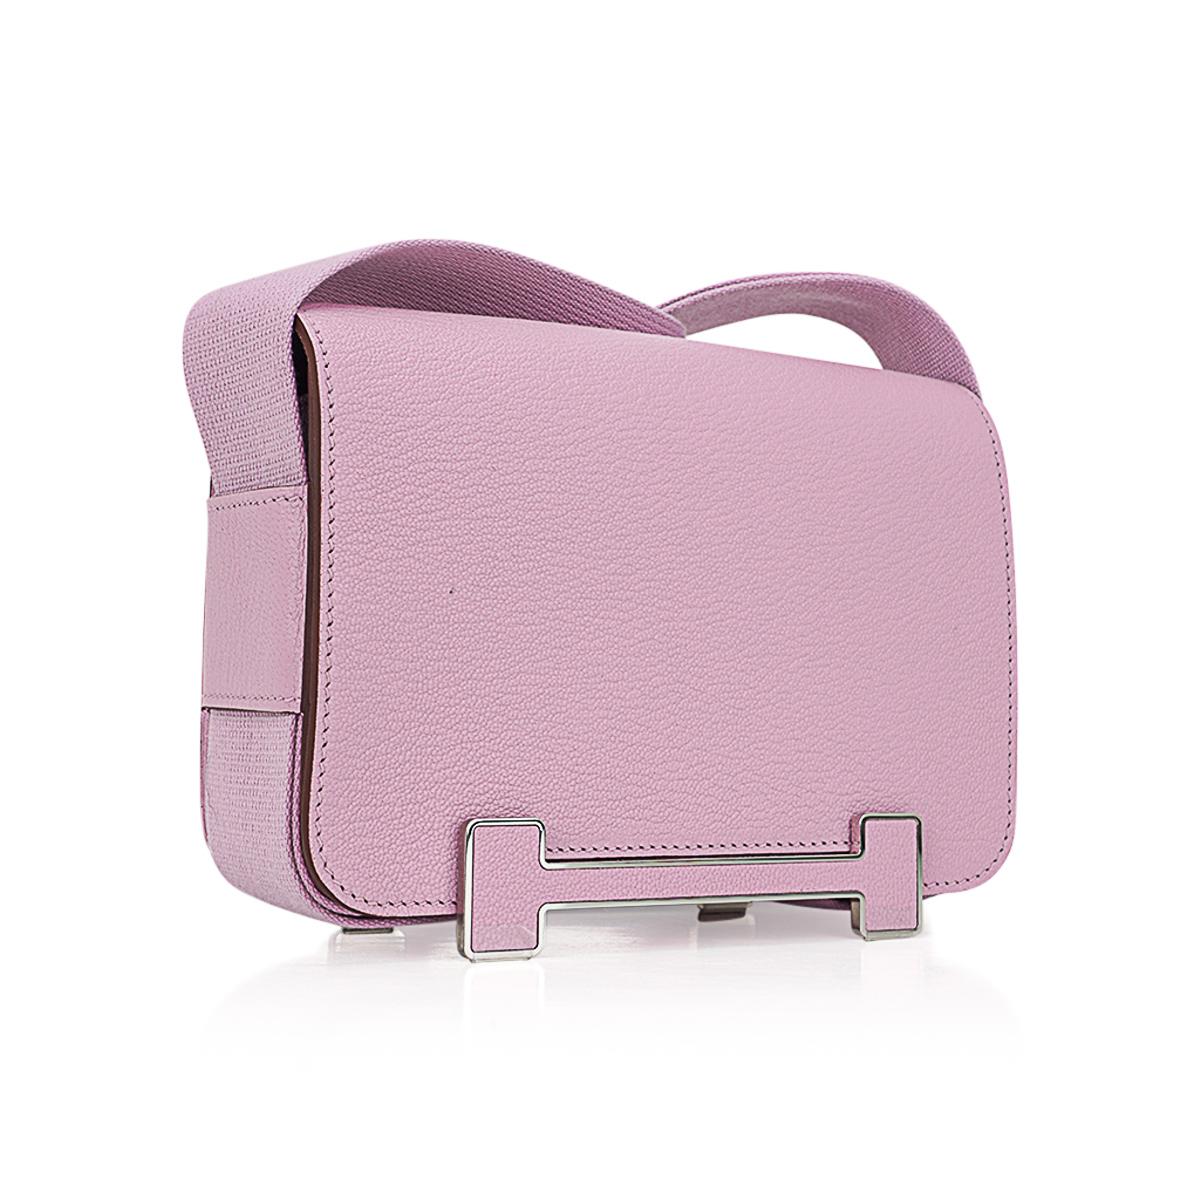 Mightychic offers an Hermes Geta bag featured in Mauve Sylvestre.
The bag has a double sided appearance with the elongated H on both sides.
The hardware serves as bottom studs.
Palladium plated H with tone on tone leather marquetry.
H has magnetic